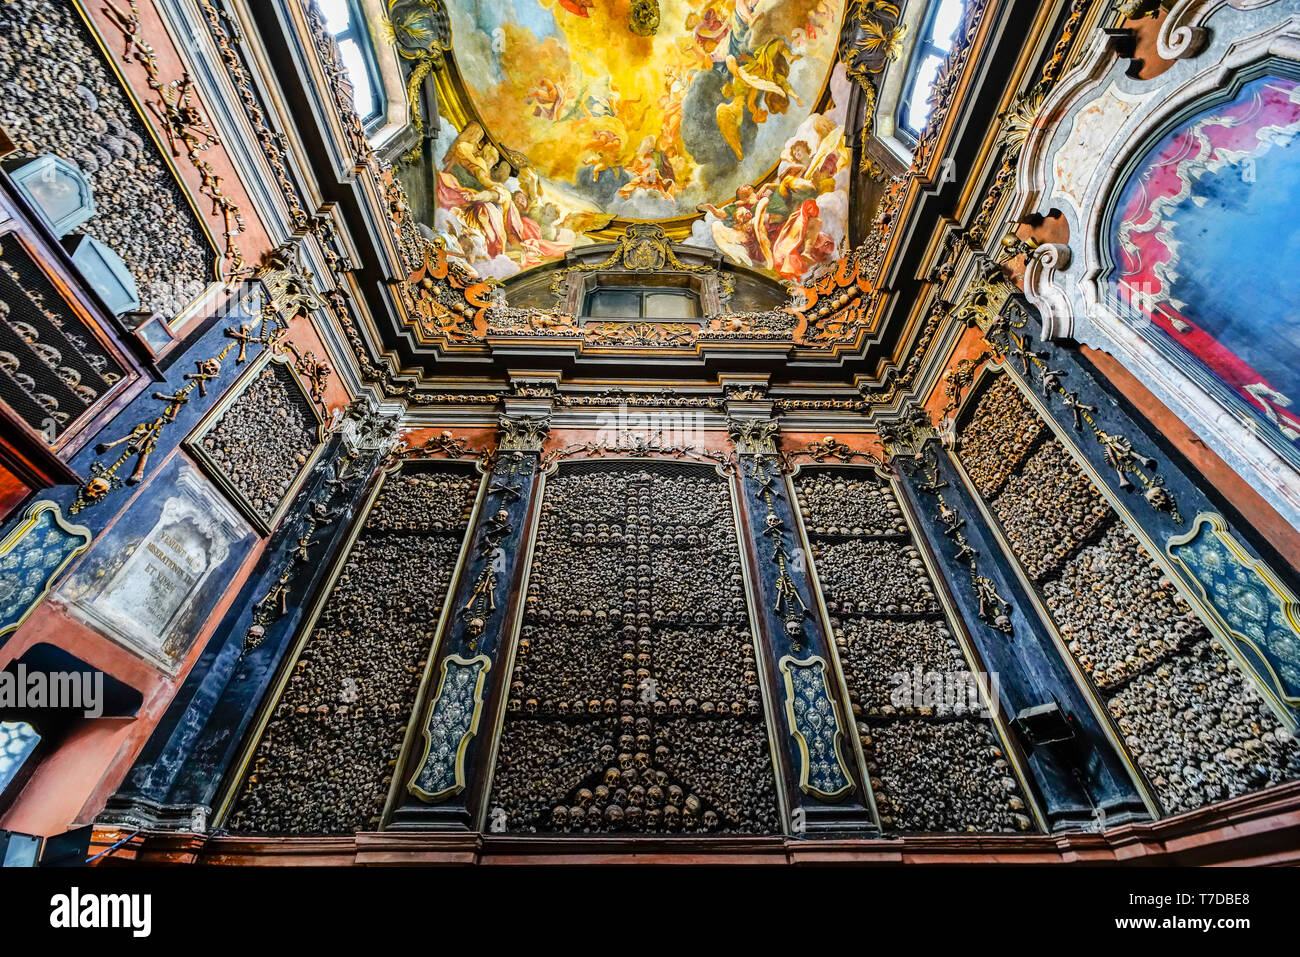 San Bernardino alle Ossa is a church in Milan famous for its ossuary. Italy. Stock Photo